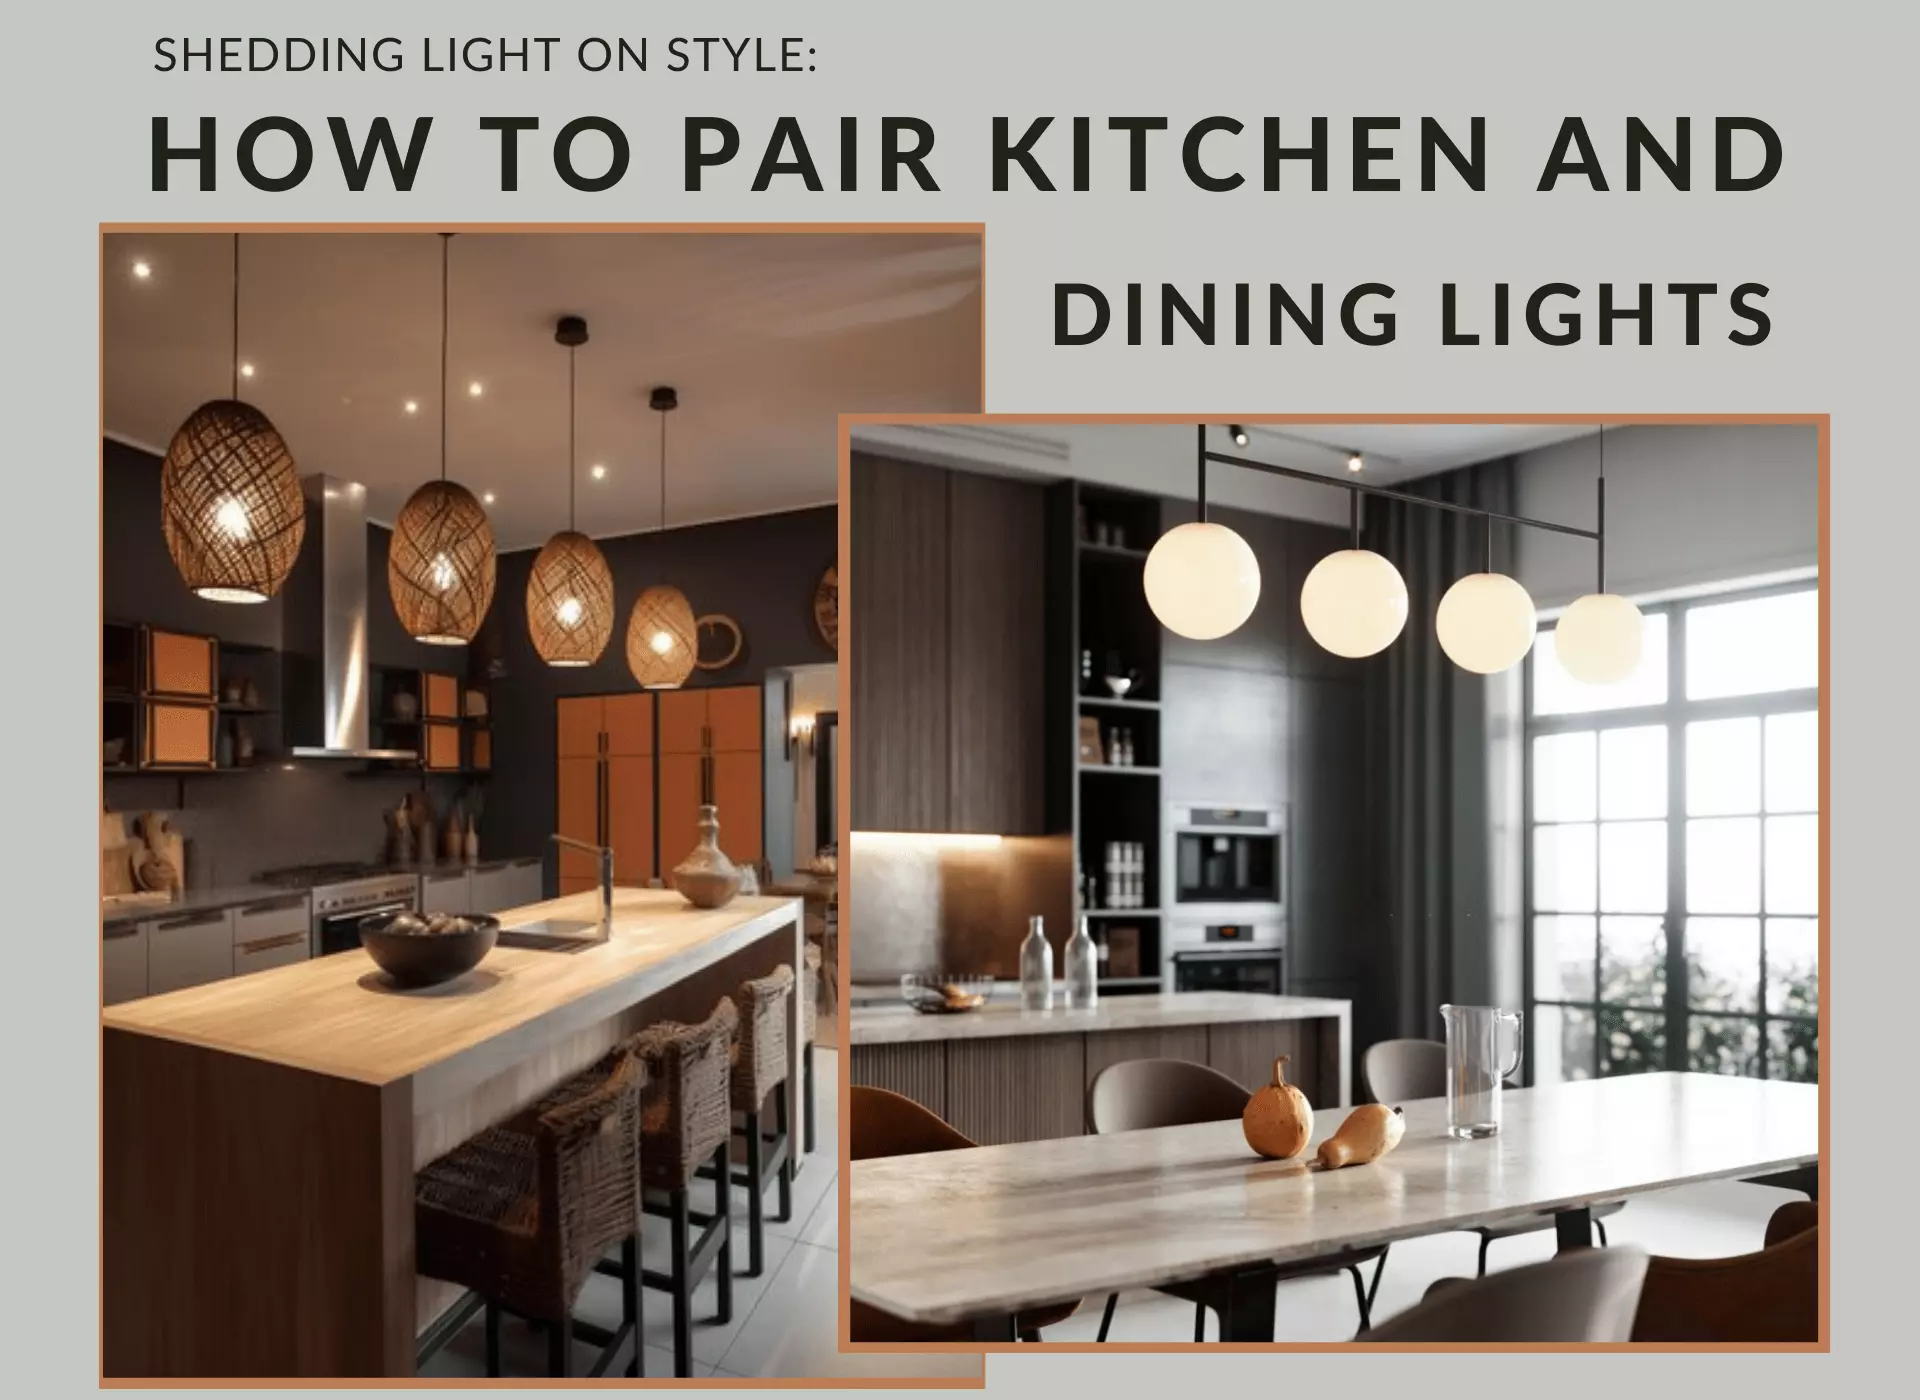 How to Pair Kitchen and Dining